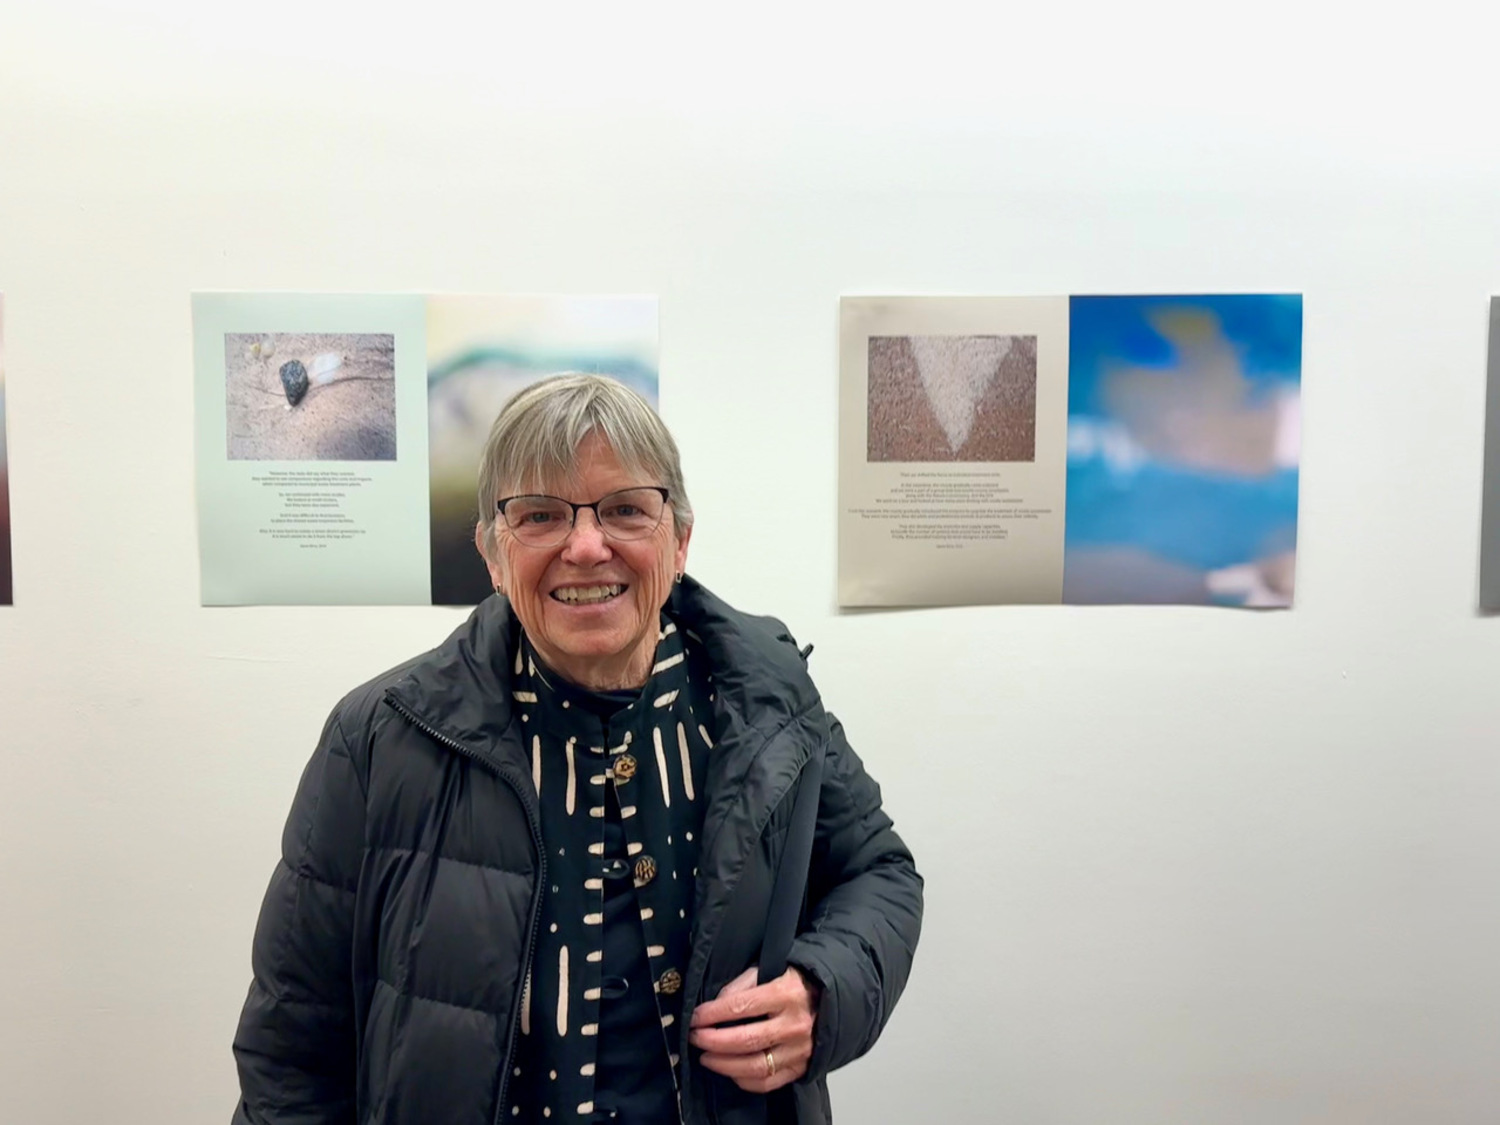 Architect Glynis Berry with the work of Anna Lise Jensen at the opening of 